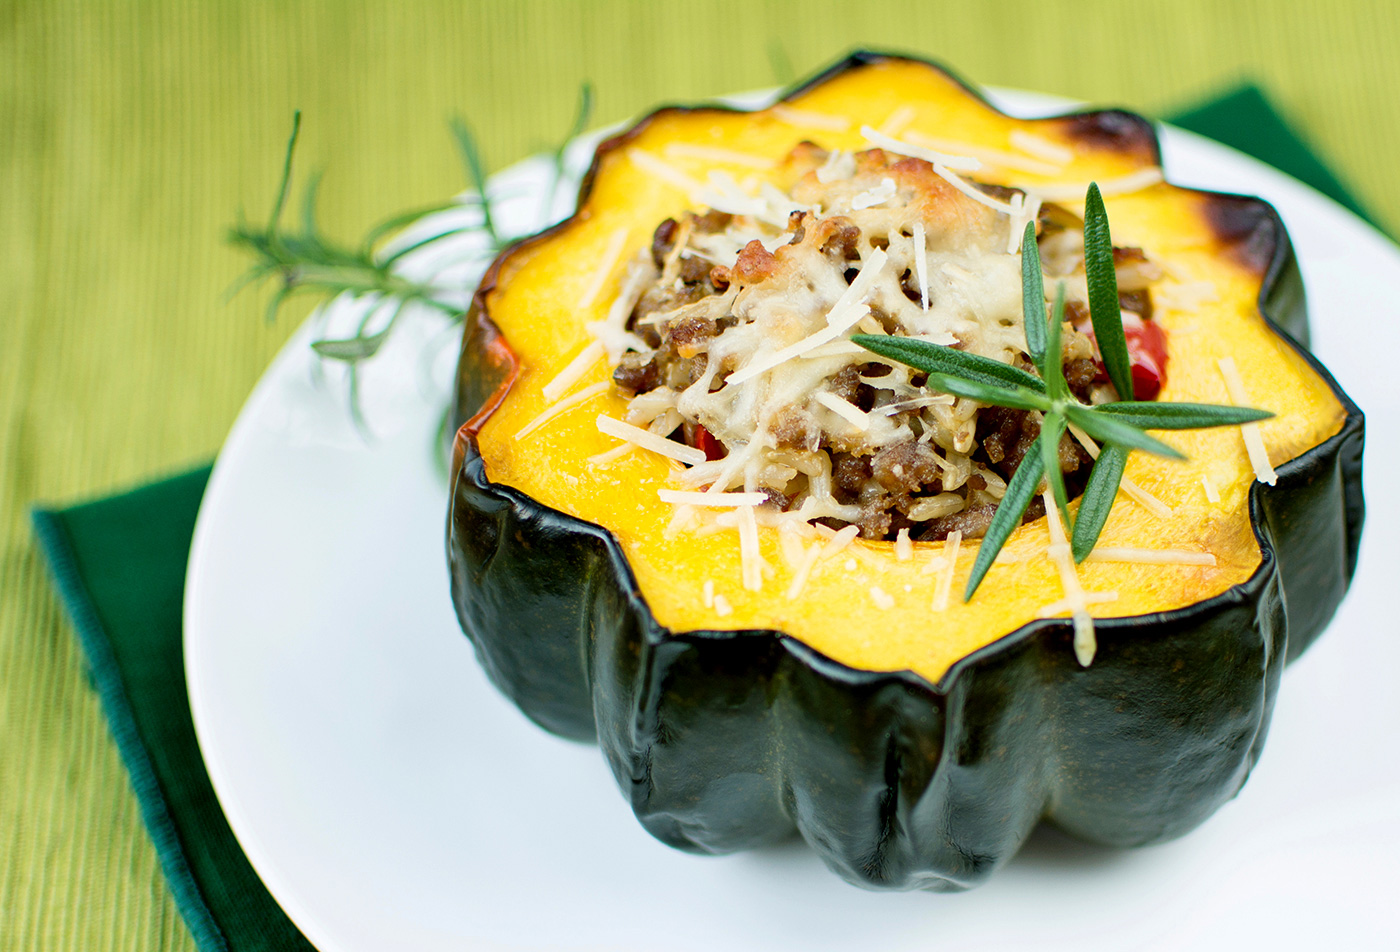 gold 'n soft recipe roasted acorn squash with pork and rice